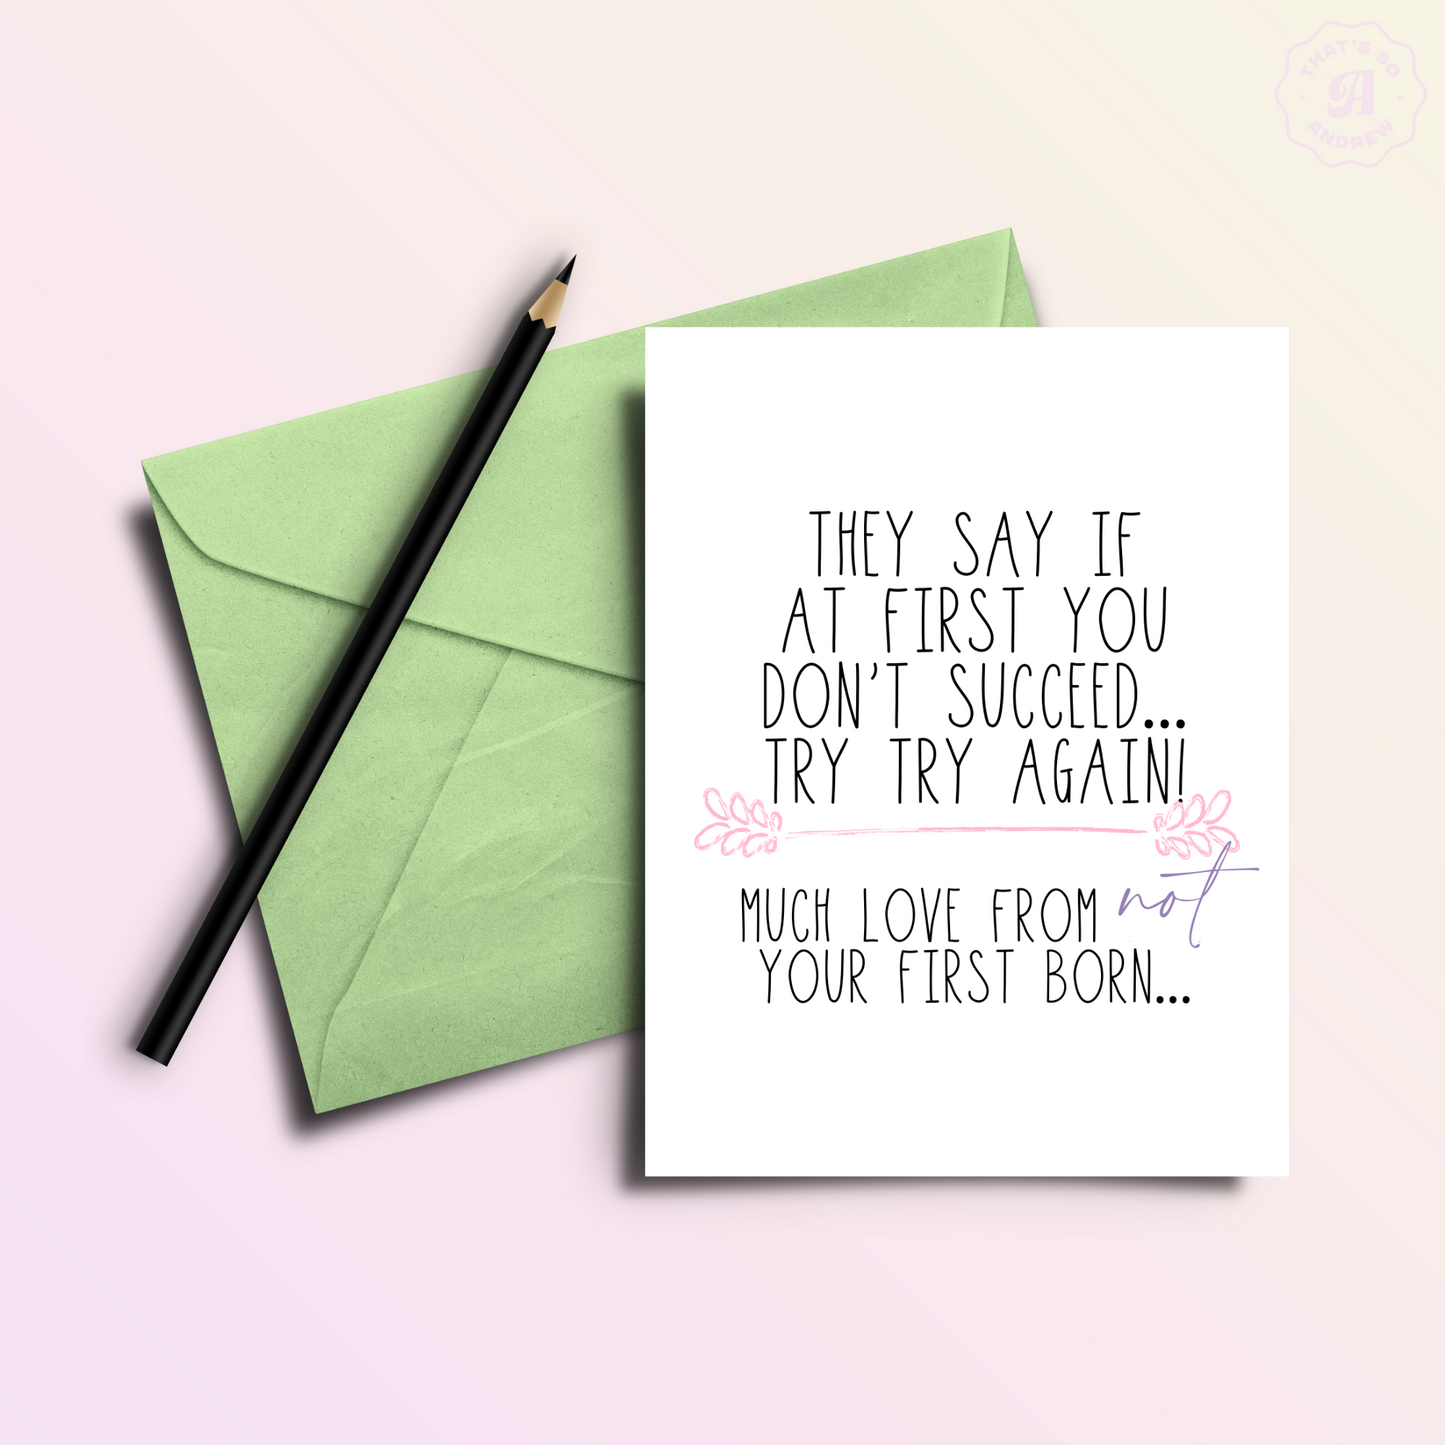 Your First Born Sucks | Mother's & Father's Day Card